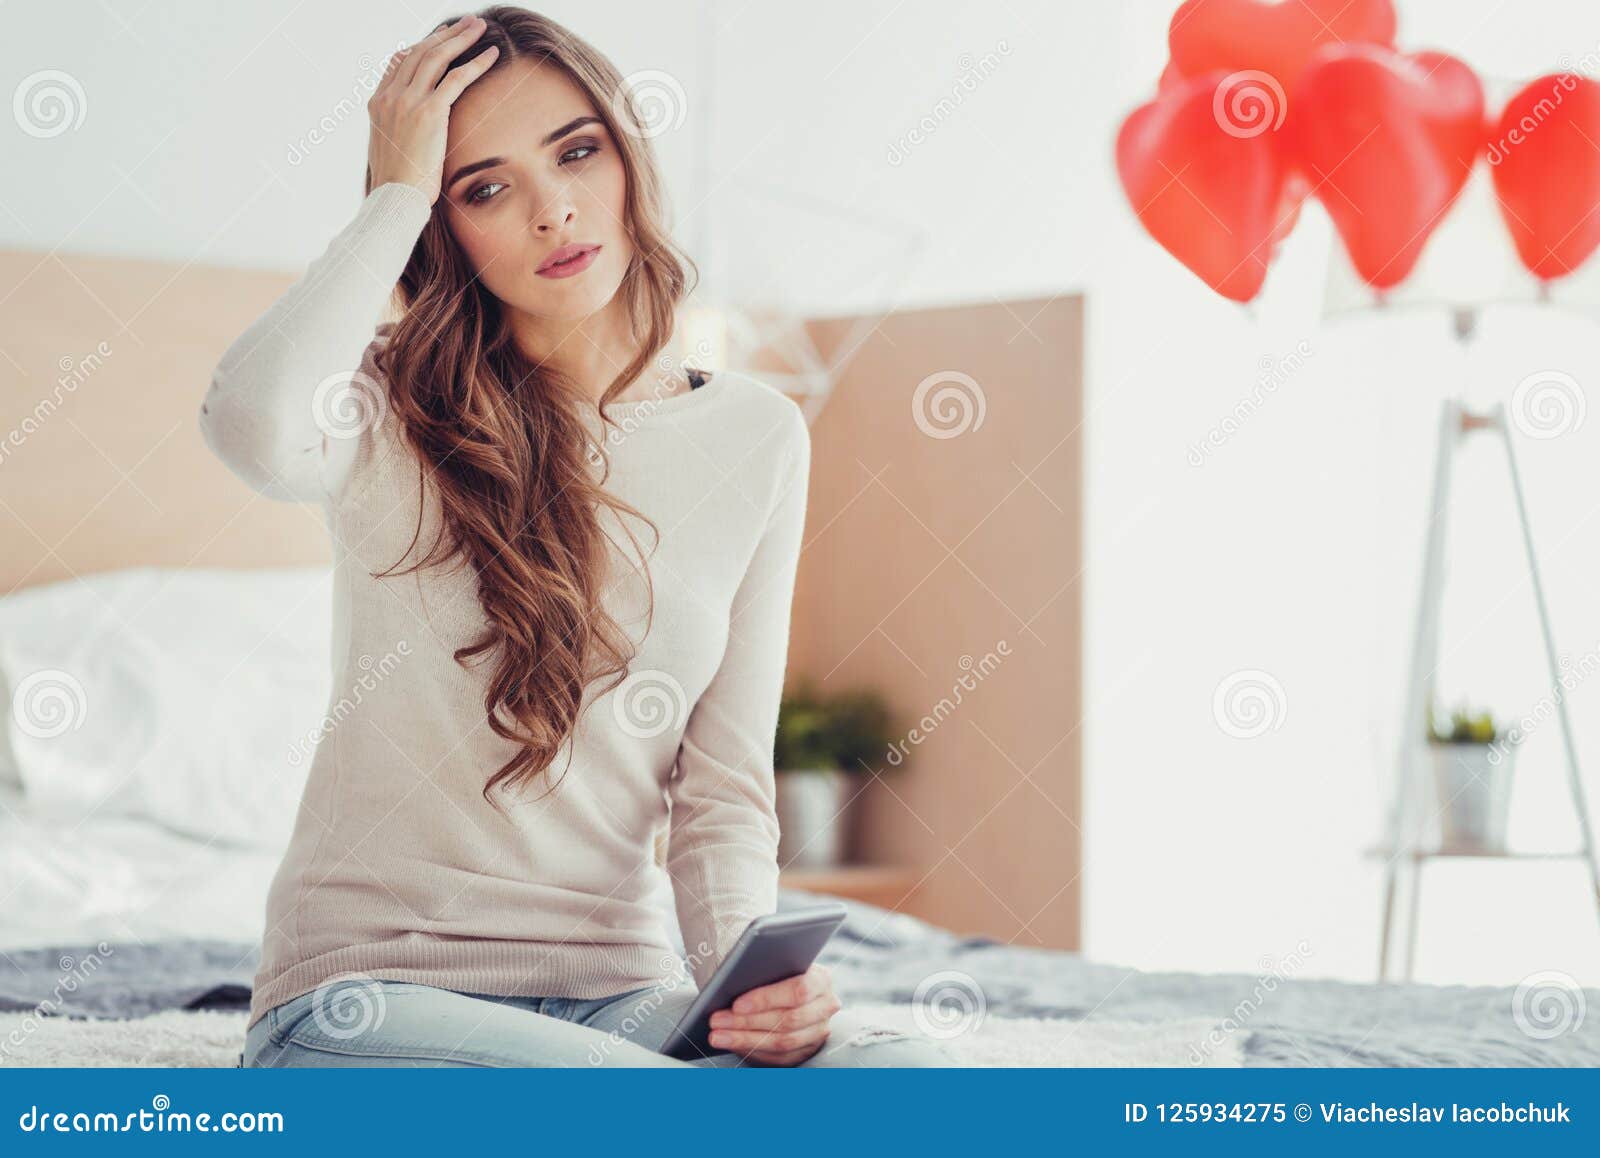 worried young girl expressing sadness